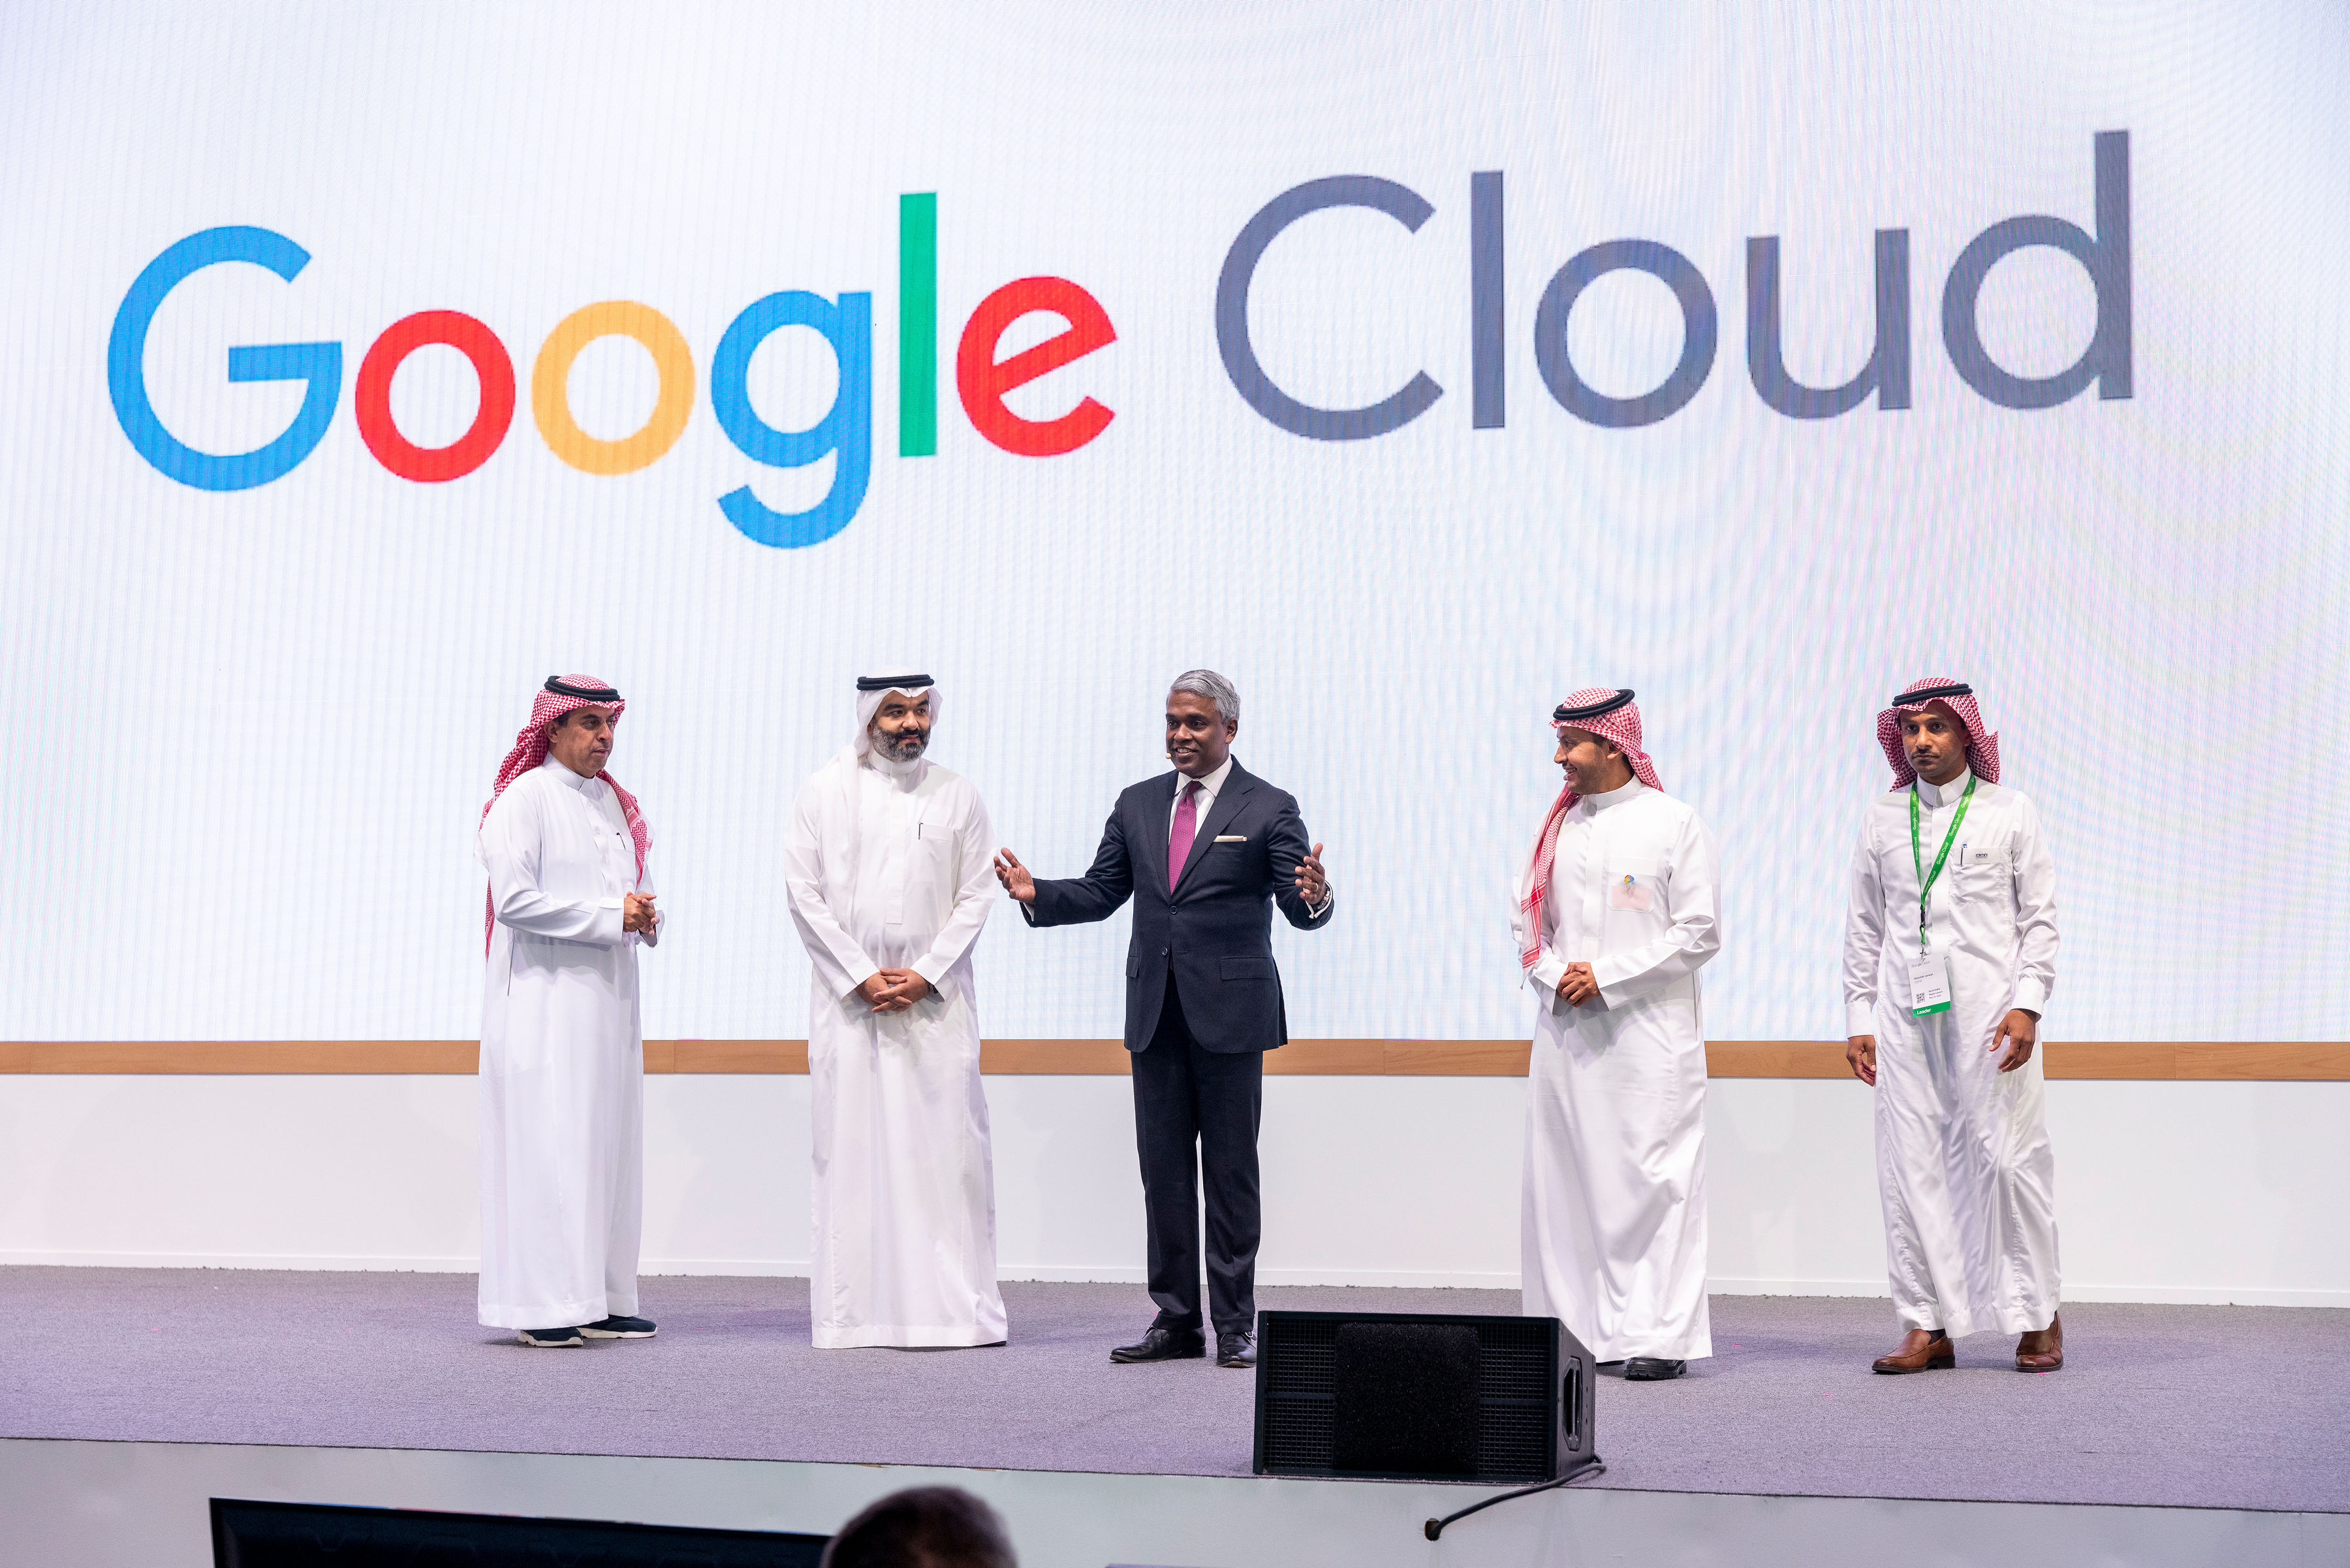 Google Cloud Expands Regional Presence with Opening of Dammam Cloud Region; Forecast to Boost Economy by USD 109 Billion by 2030